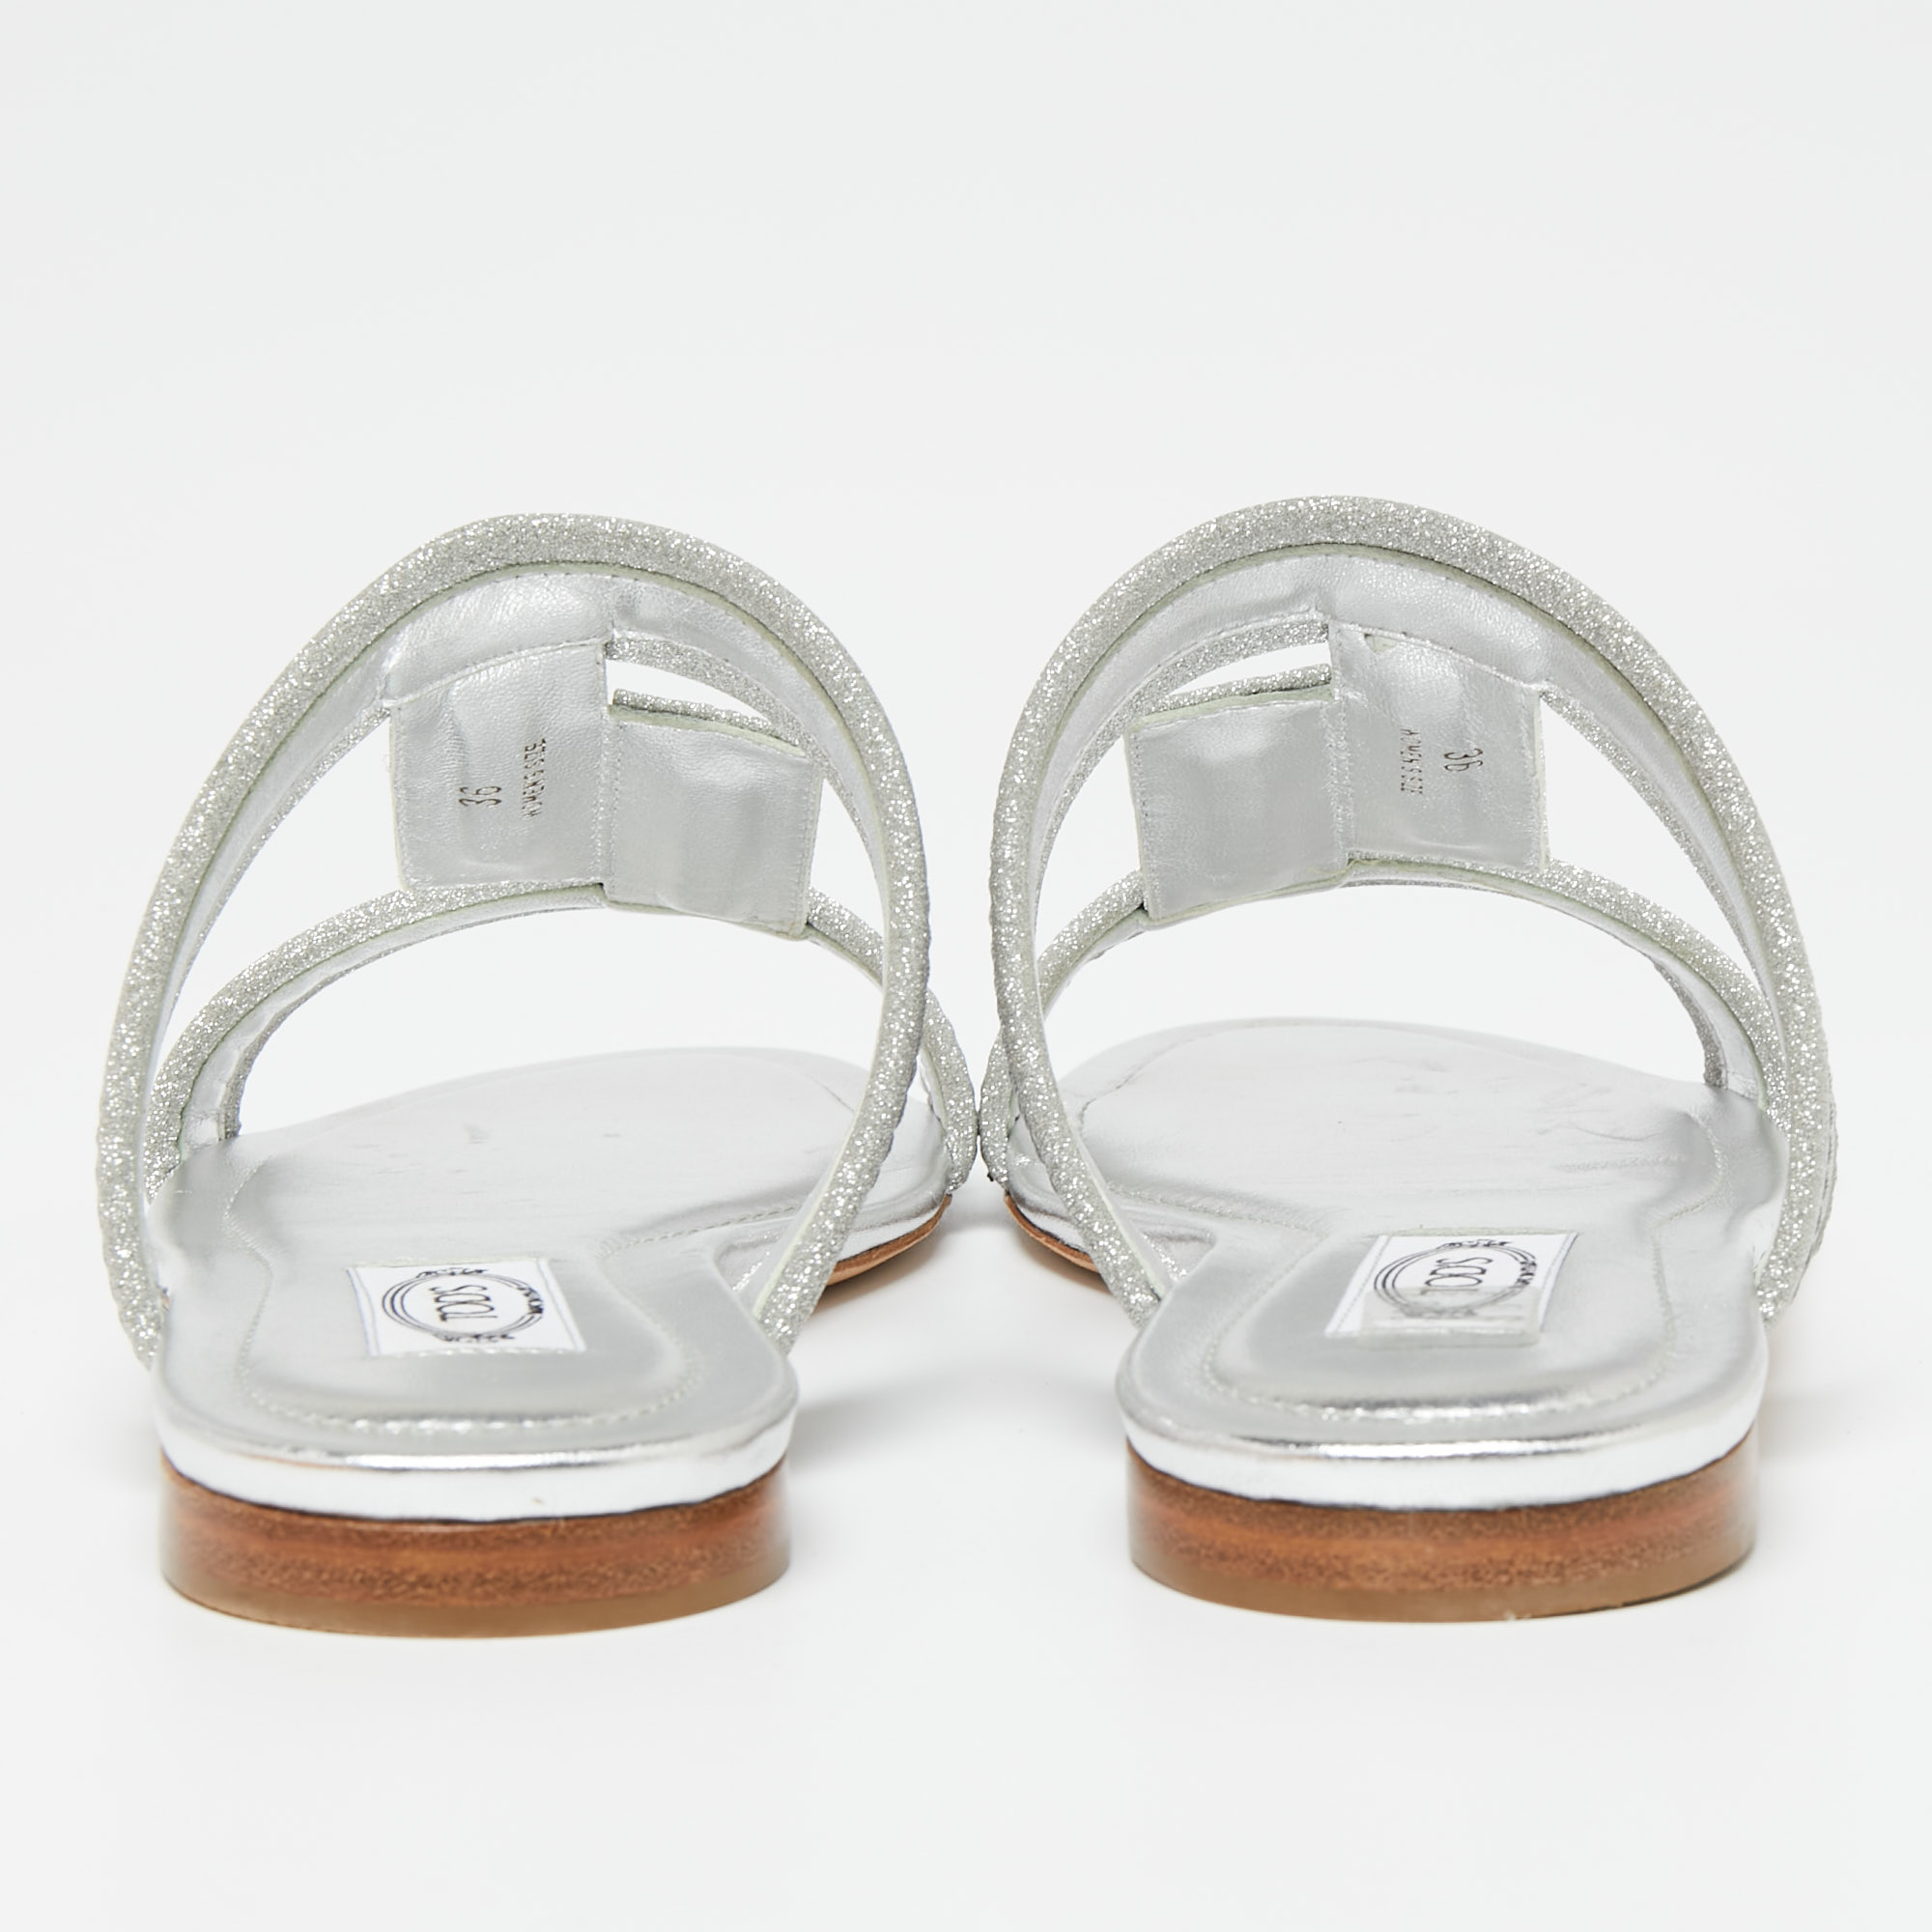 Tod's Silver Glitter Double T Strap Flat Slides Size 36